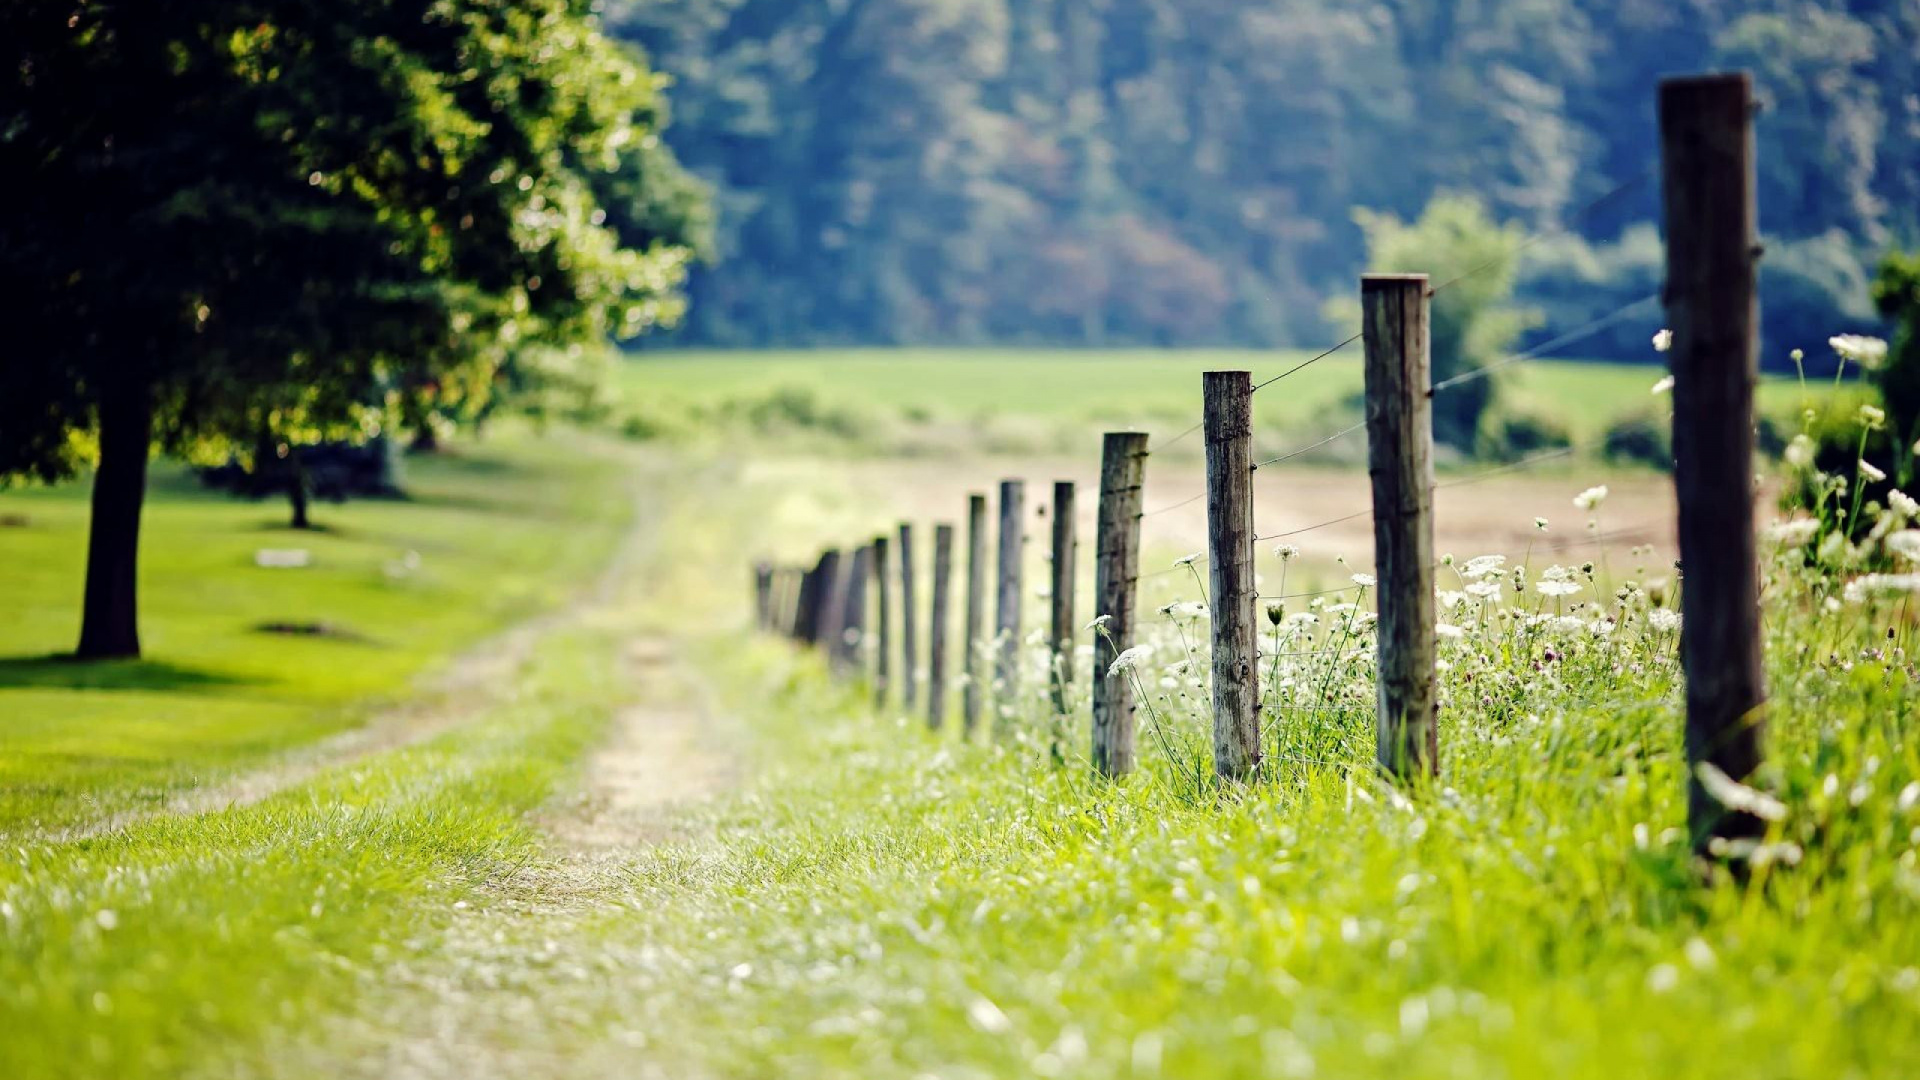 Brown Wooden Fence on Green Grass Field During Daytime. Wallpaper in 1920x1080 Resolution